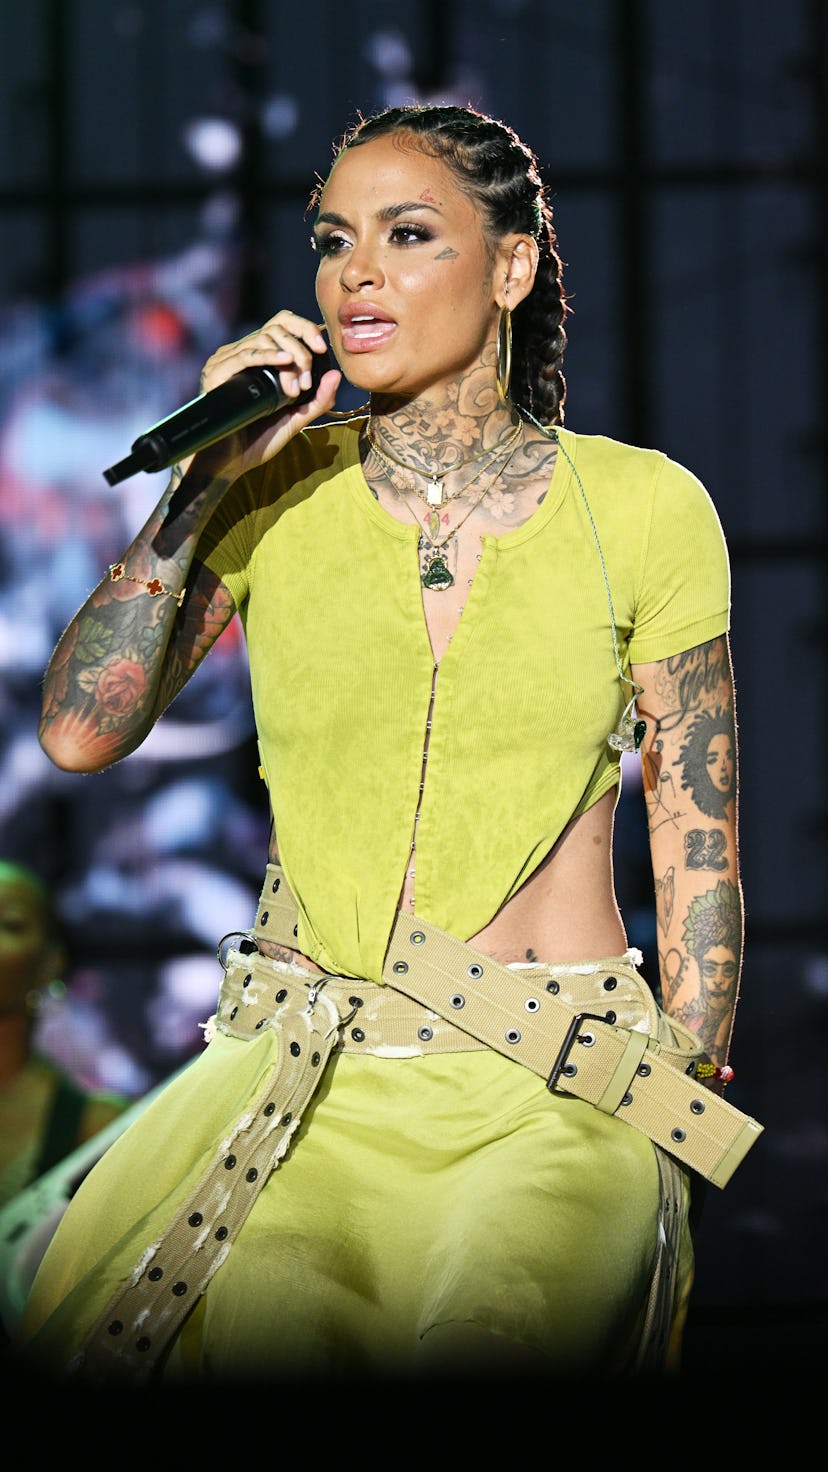 Kehlani, a celebrity with face tattoos, performed onstage at IN BLOOM on July 10, 2022.